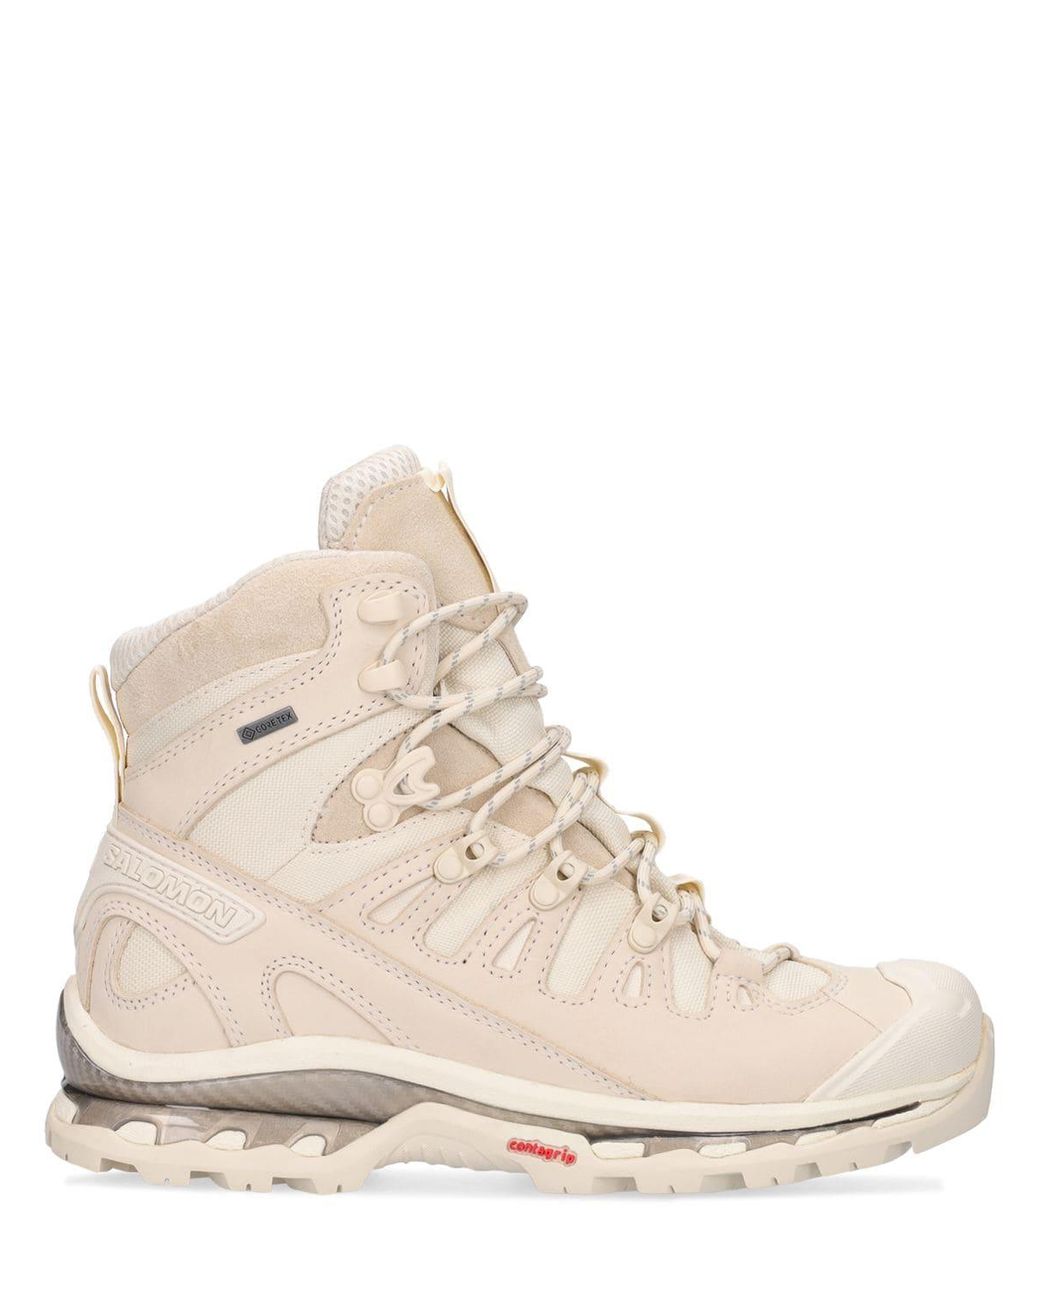 Salomon Quest Gtx Advanced Ankle Boots in Natural | Lyst UK